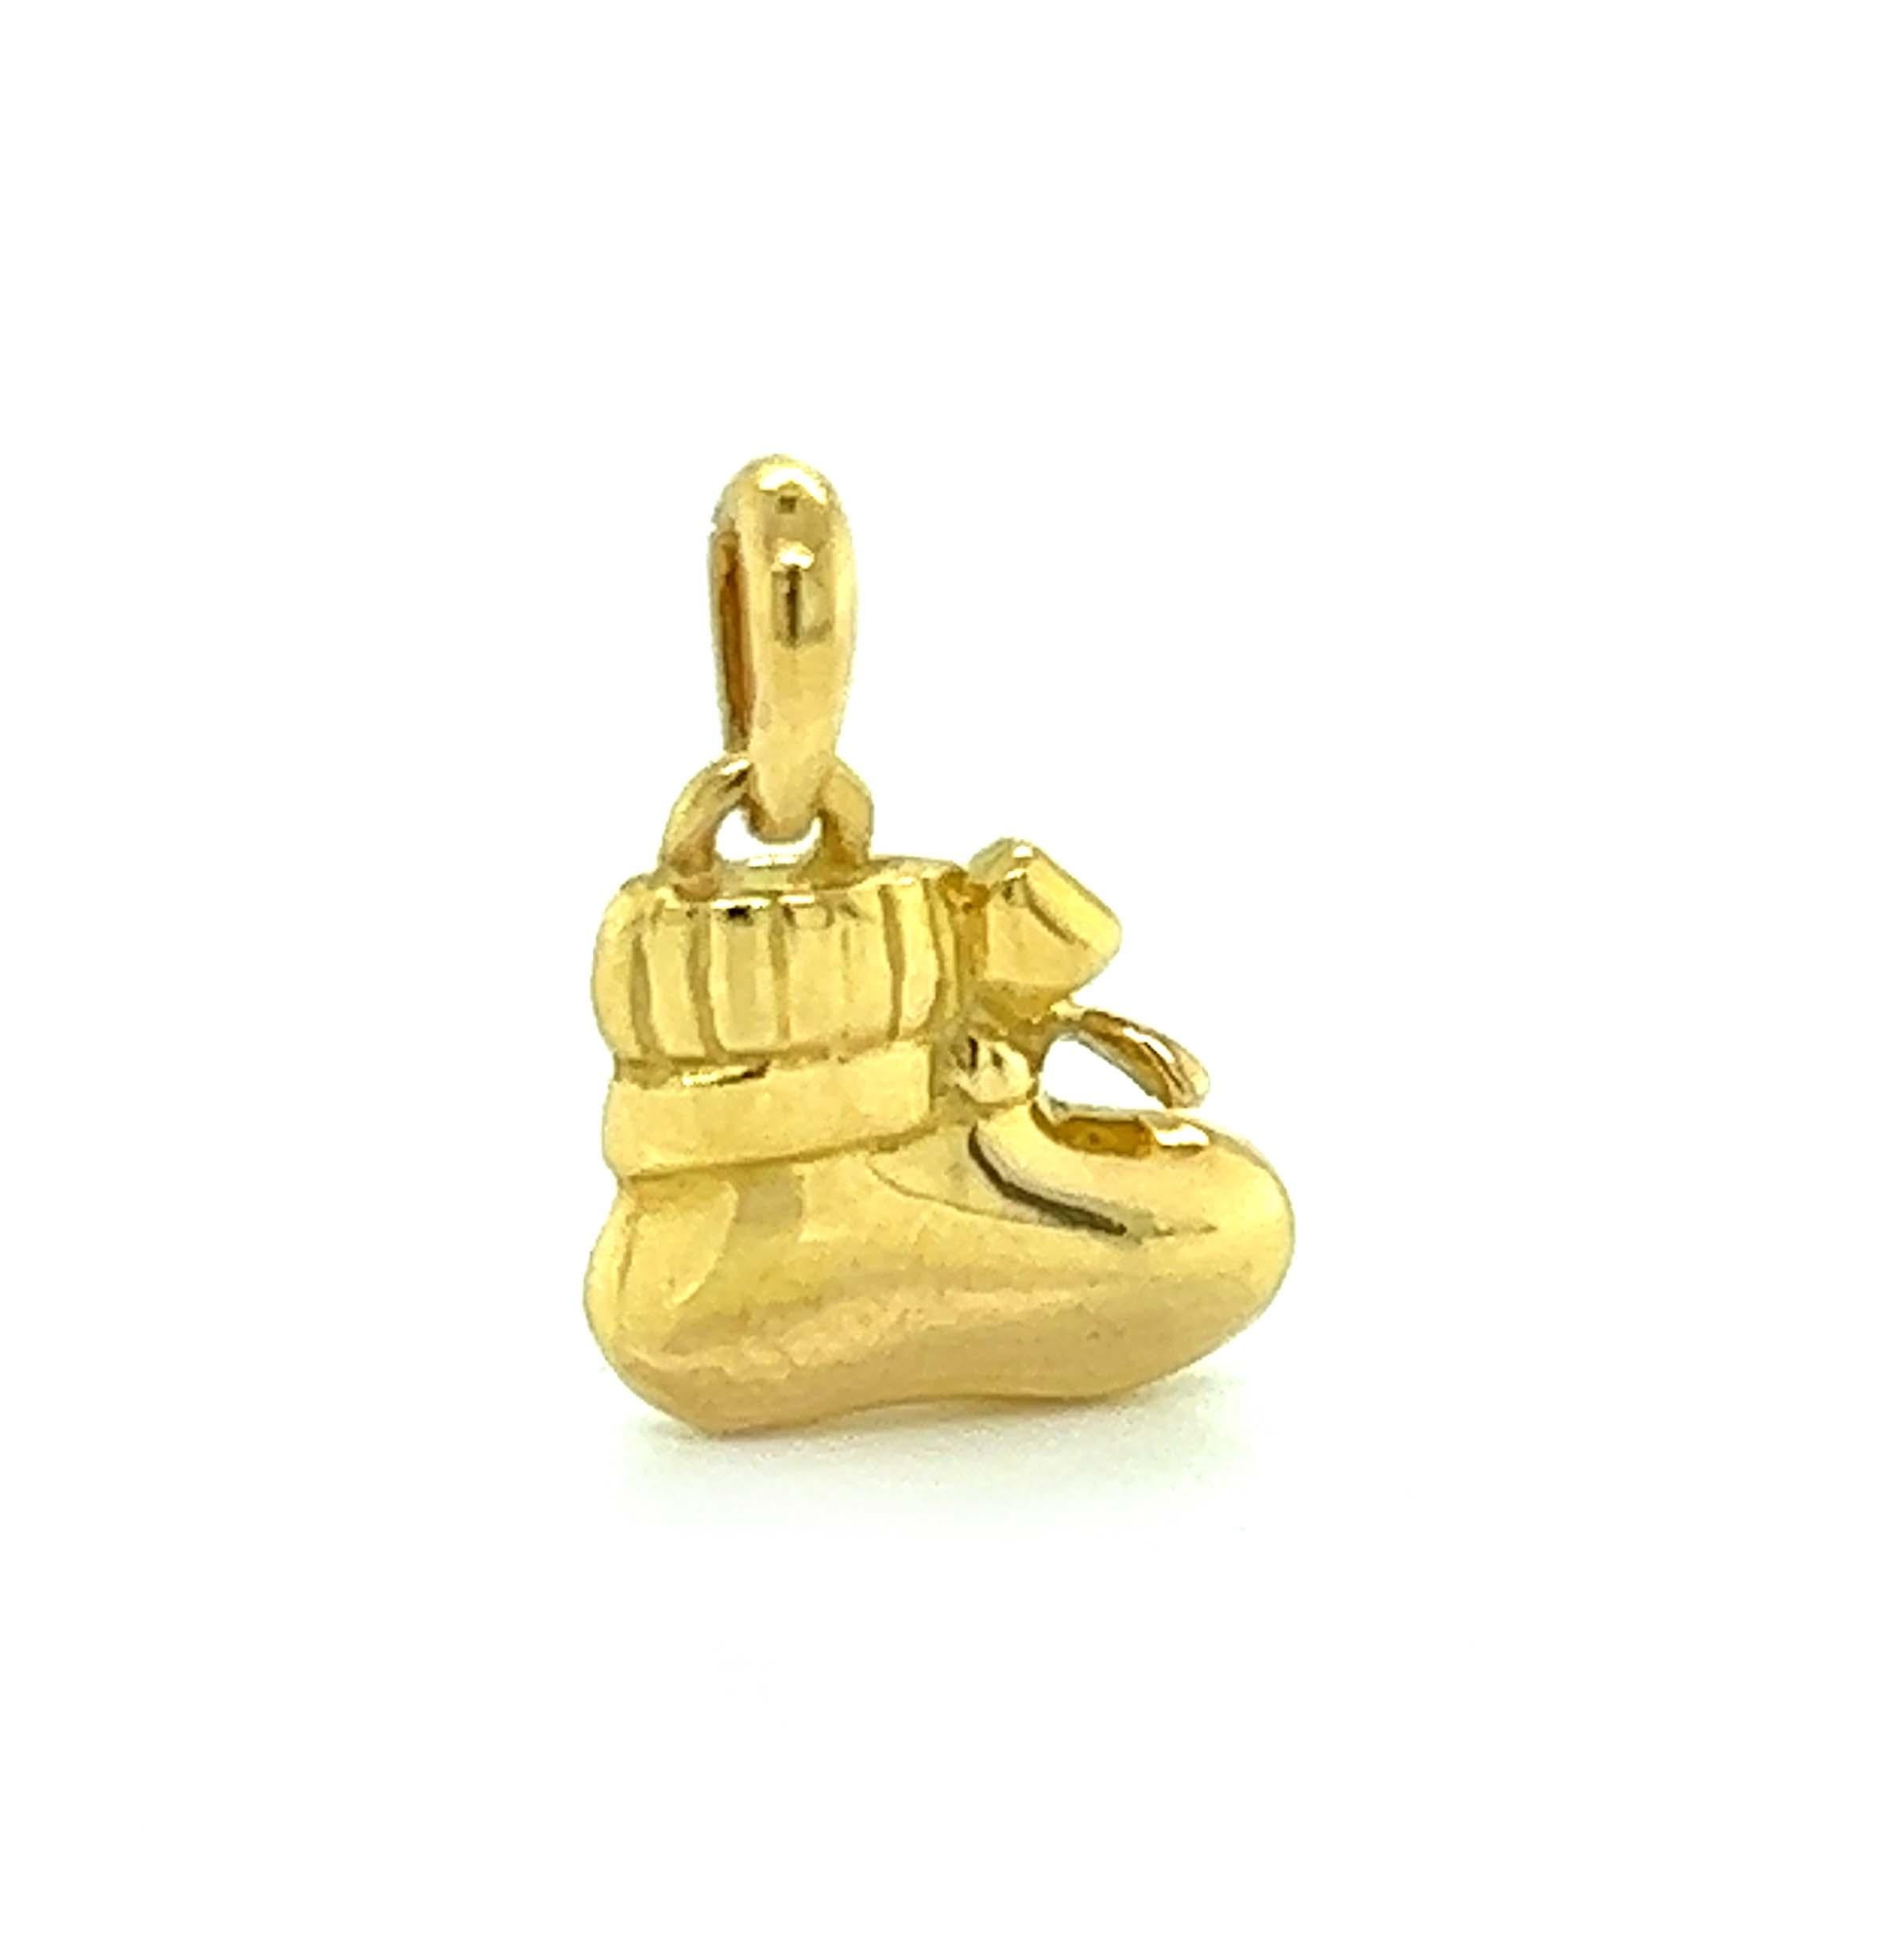 Brilliant Cut Van Cleef & Arpels Sapphire 18k Yellow Gold Baby Booty Charm Pendant For Sale